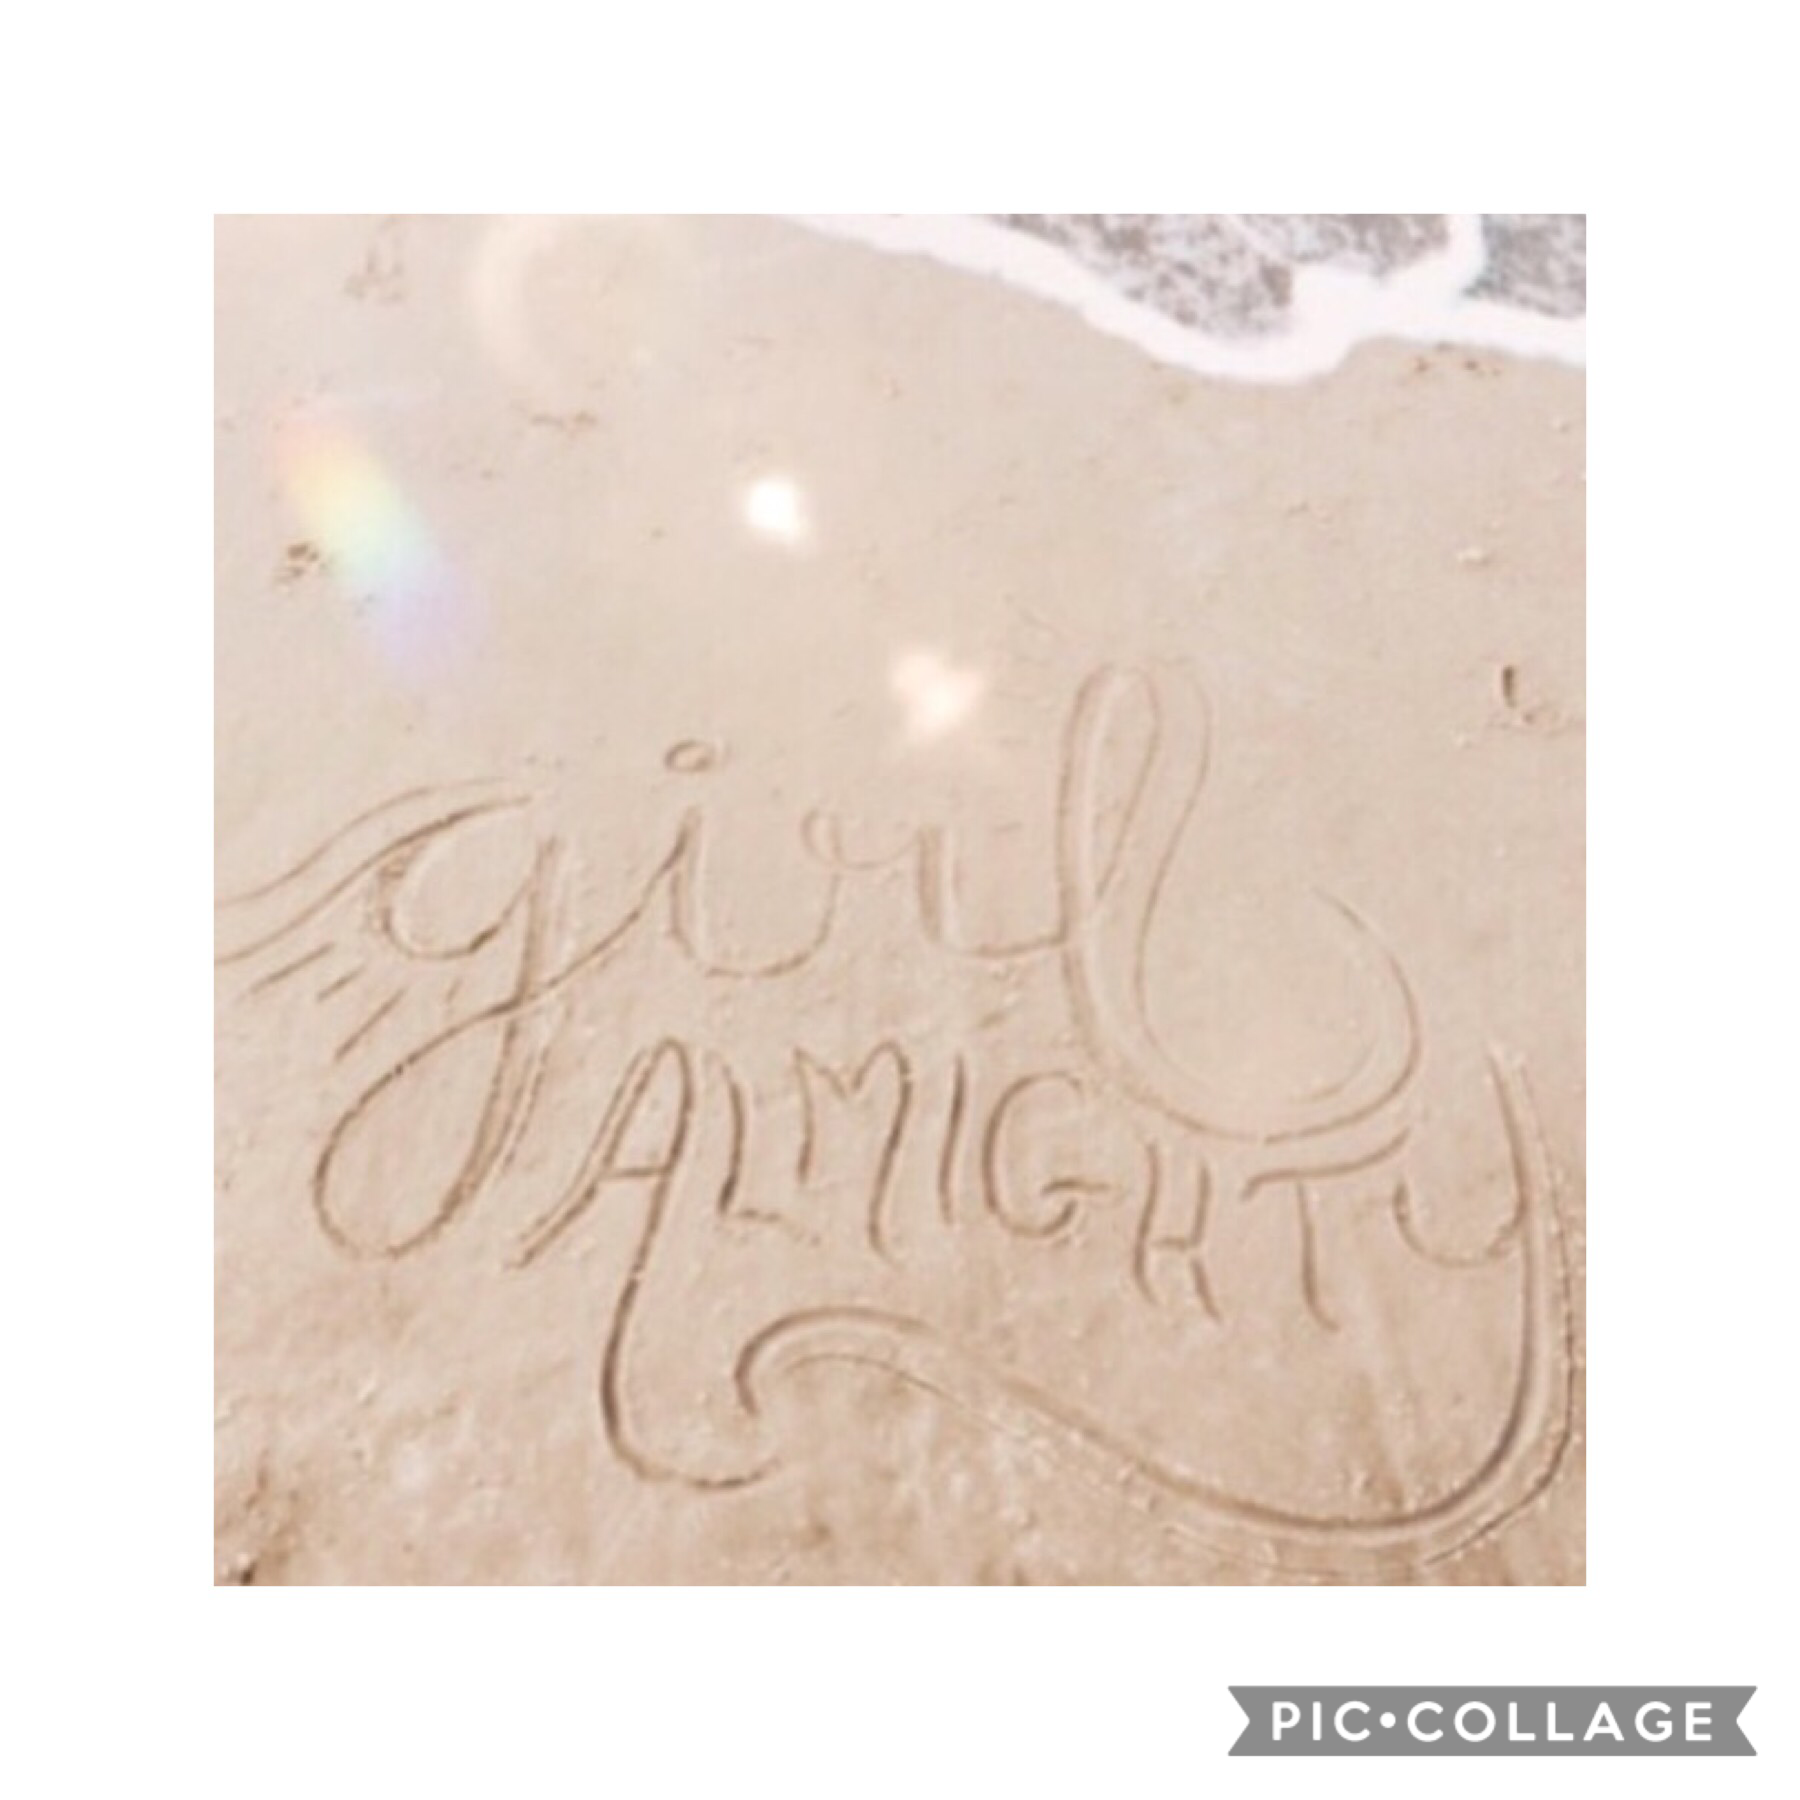 I’m gonna turn 16 in 19 minutes I think and I’m not sure how to feel about it. also I drew this on the beach the other day and my #1 made this lovely edit of it 